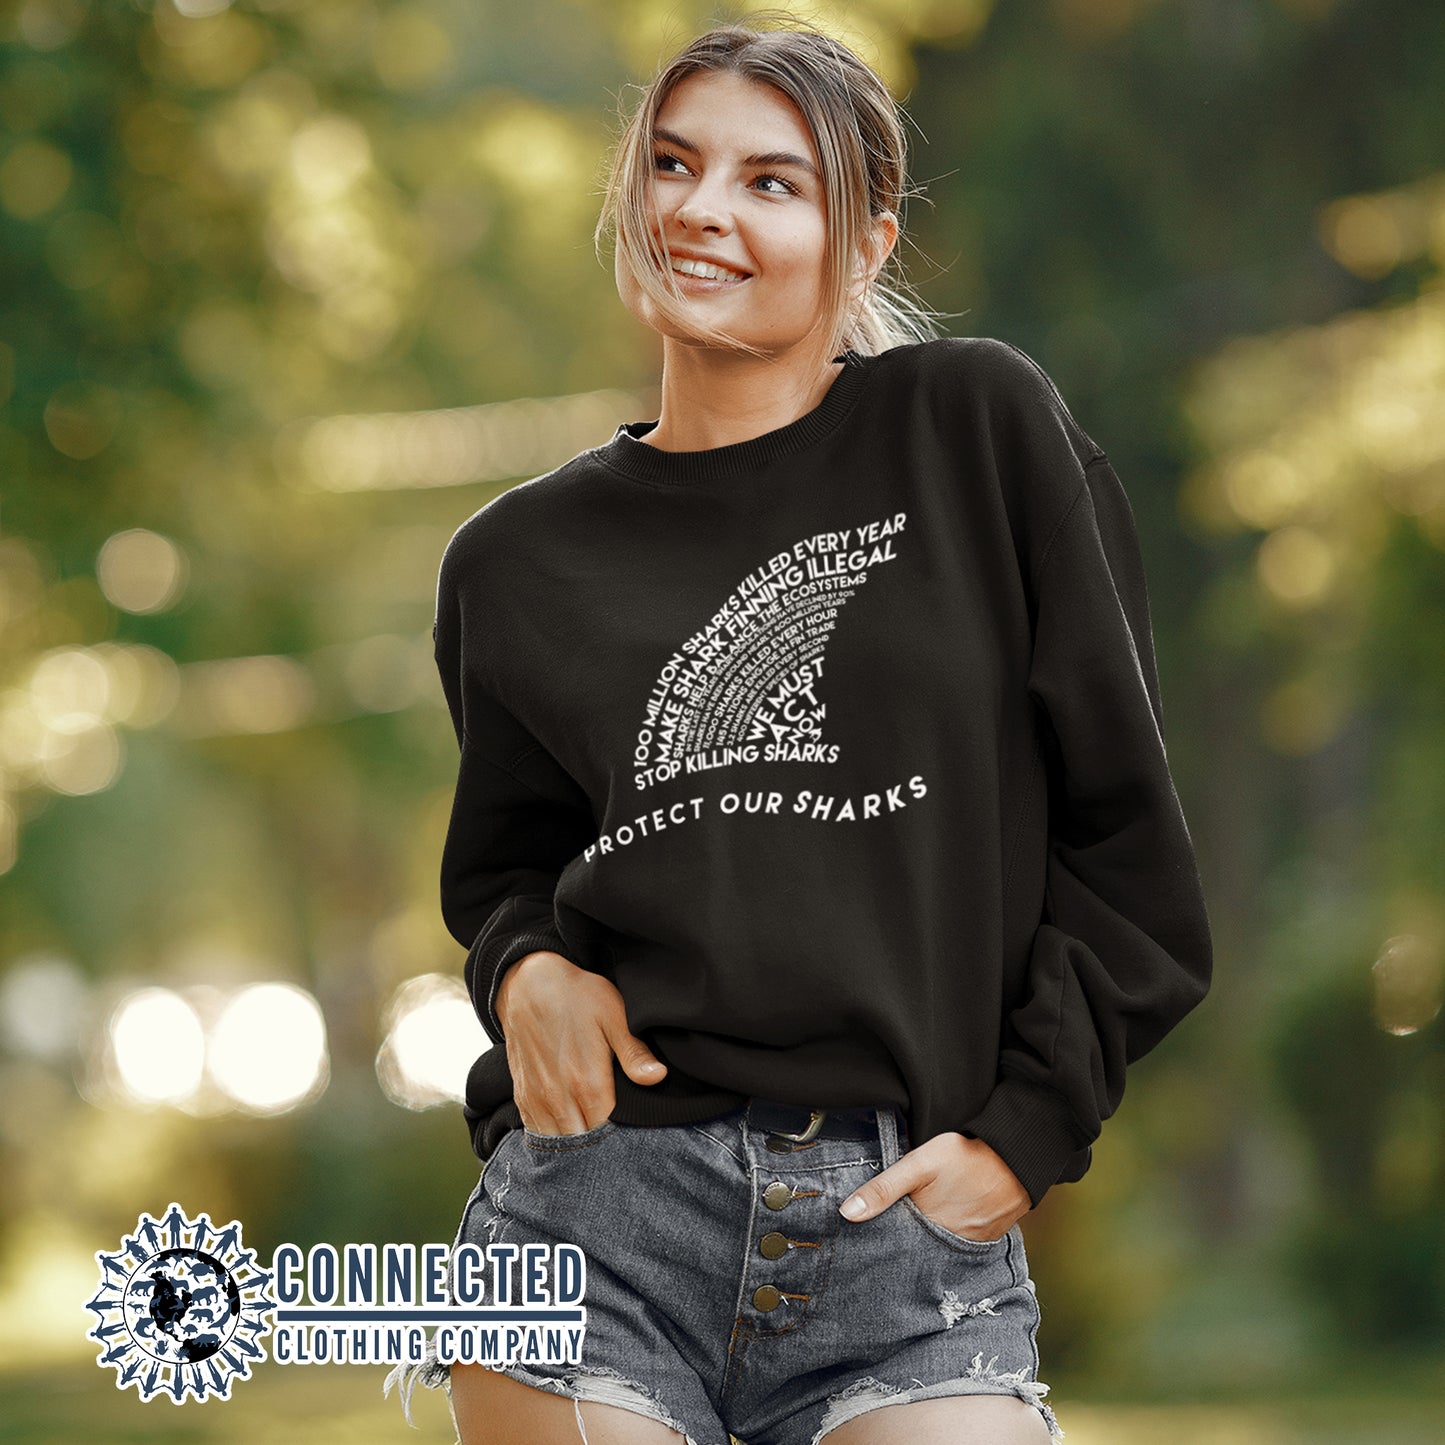 Model Wearing Black Protect Our Sharks Unisex Crewneck Sweatshirt - sweetsherriloudesigns - Ethically and Sustainably Made - 10% of profits donated to shark conservation and ocean conservation